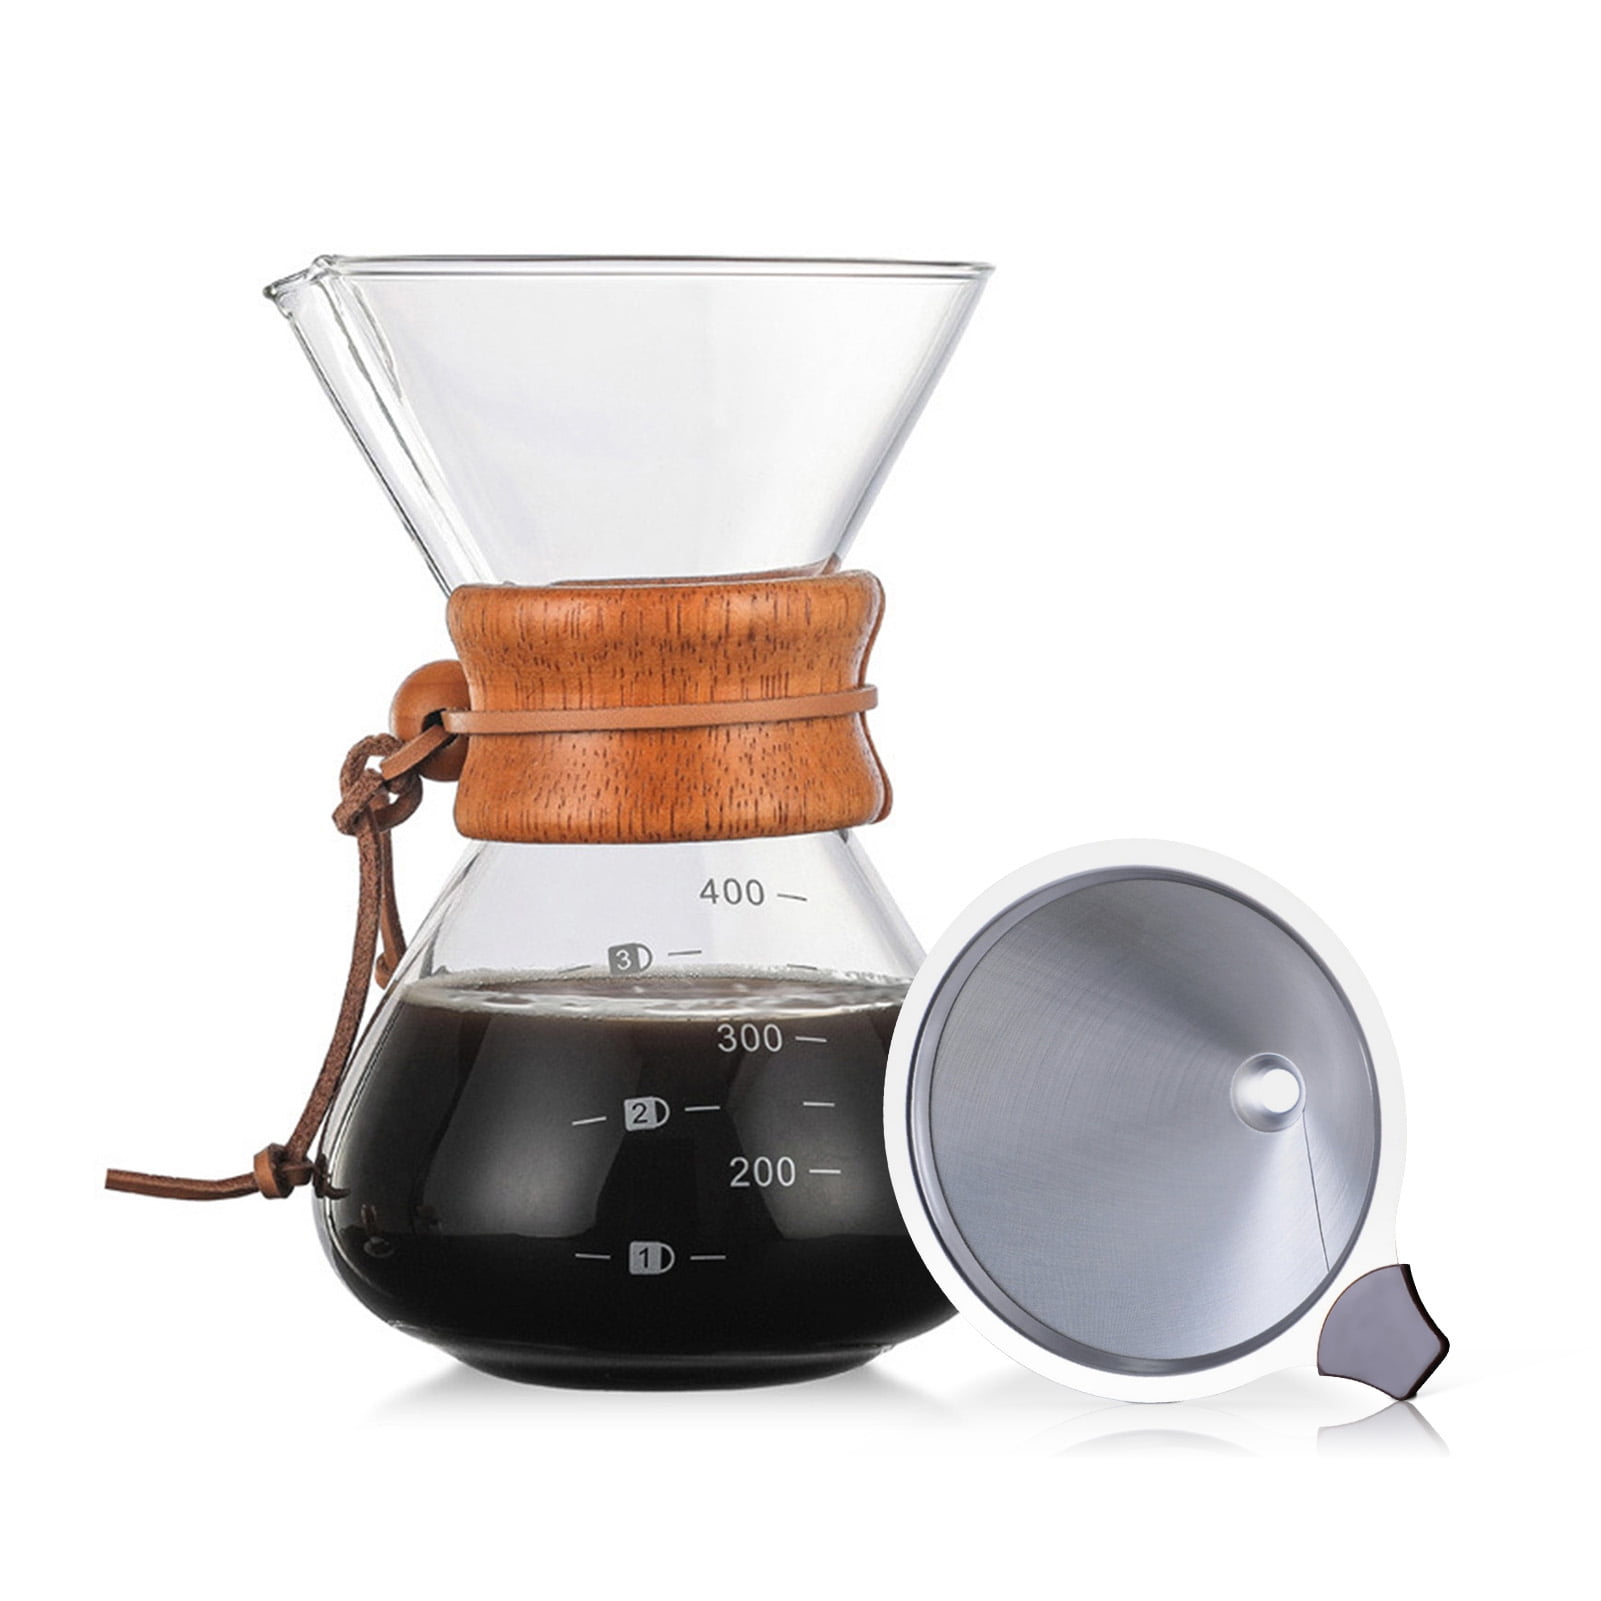 Gkcity Bean Envy Pour Over Coffee Maker - 4 Cup Borosilicate Glass Carafe -  Rust Resistant Stainless Steel Paperless Filter/Dripper - Includes Custom